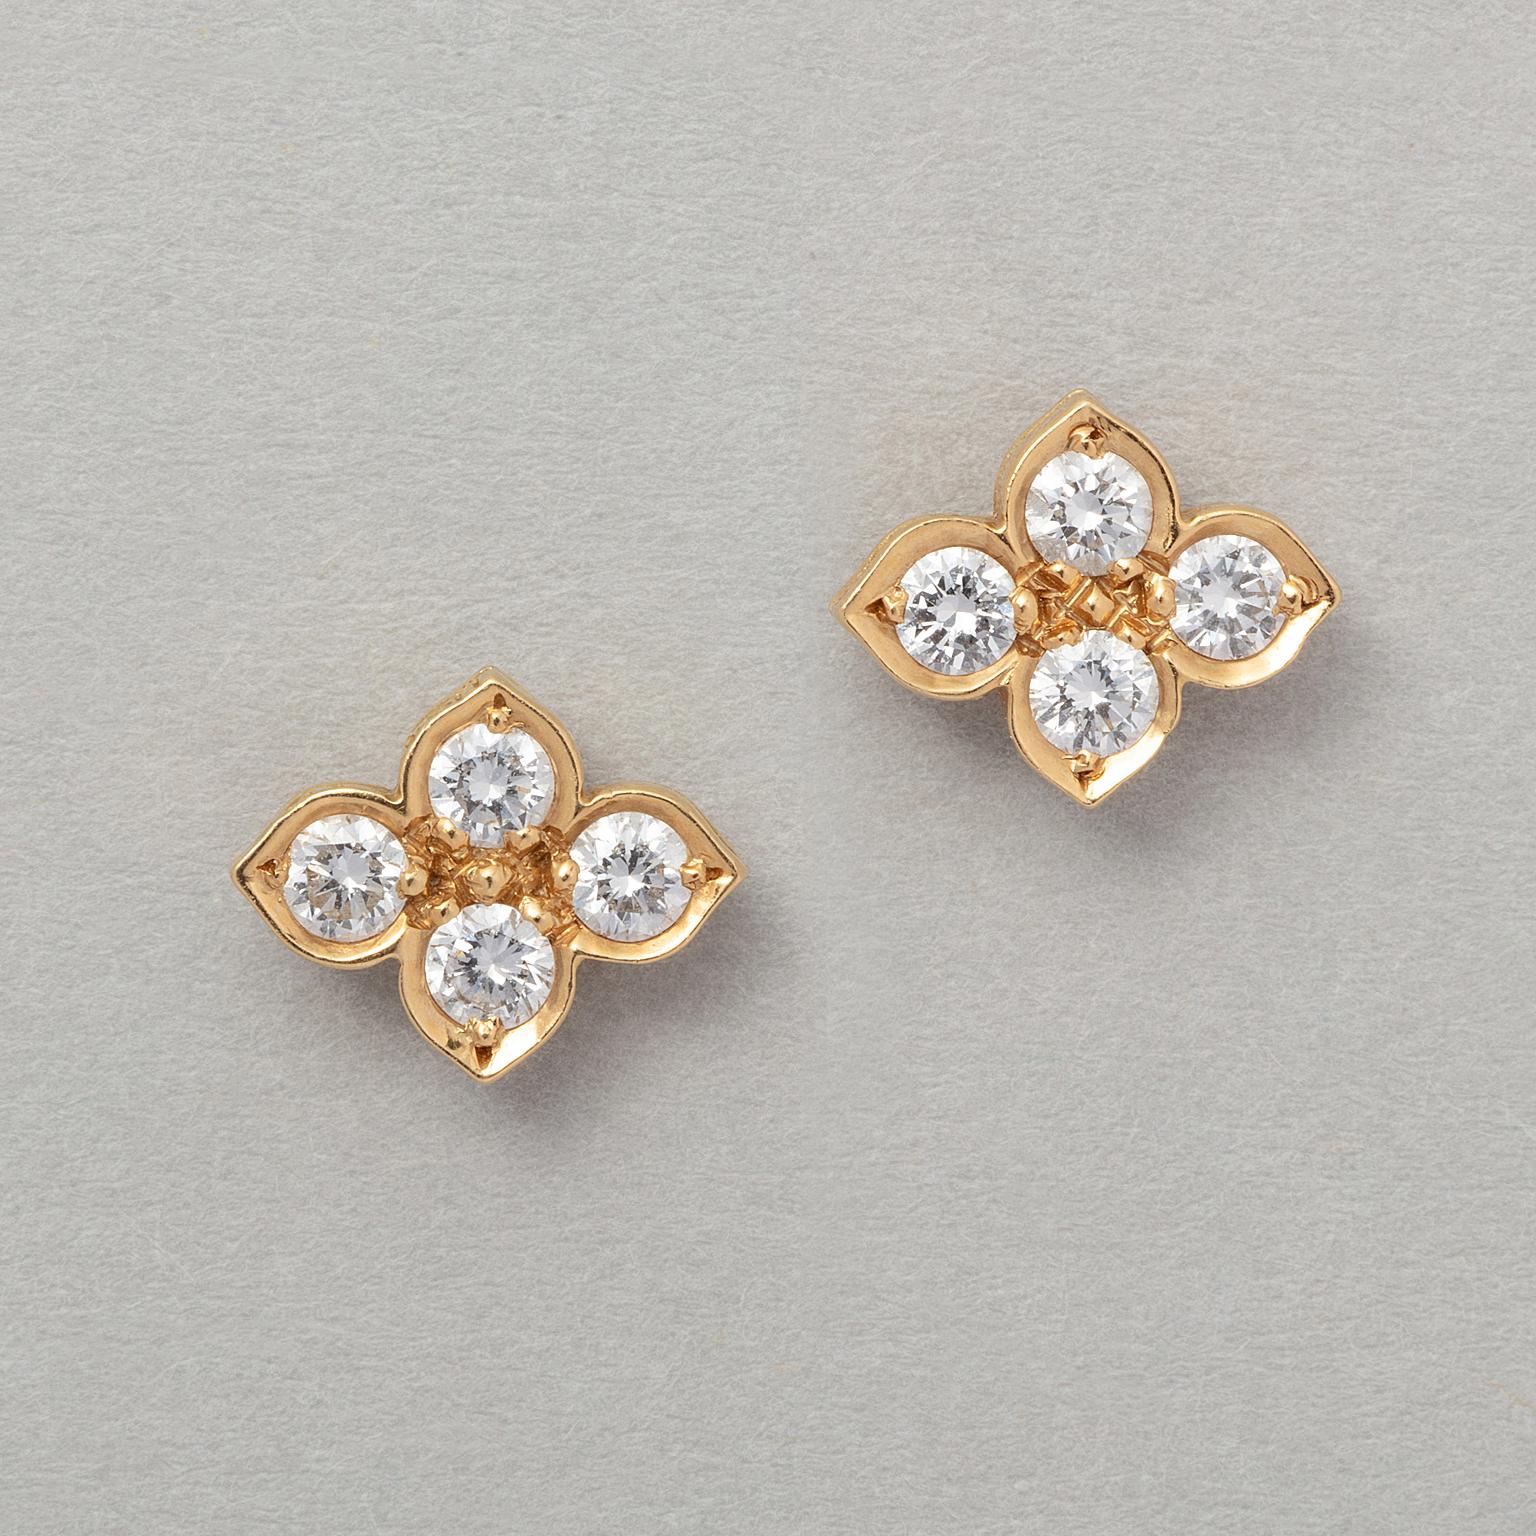 Brilliant Cut A Pair of 18 Carat Gold and Diamond Cartier Flower Stud Earrings